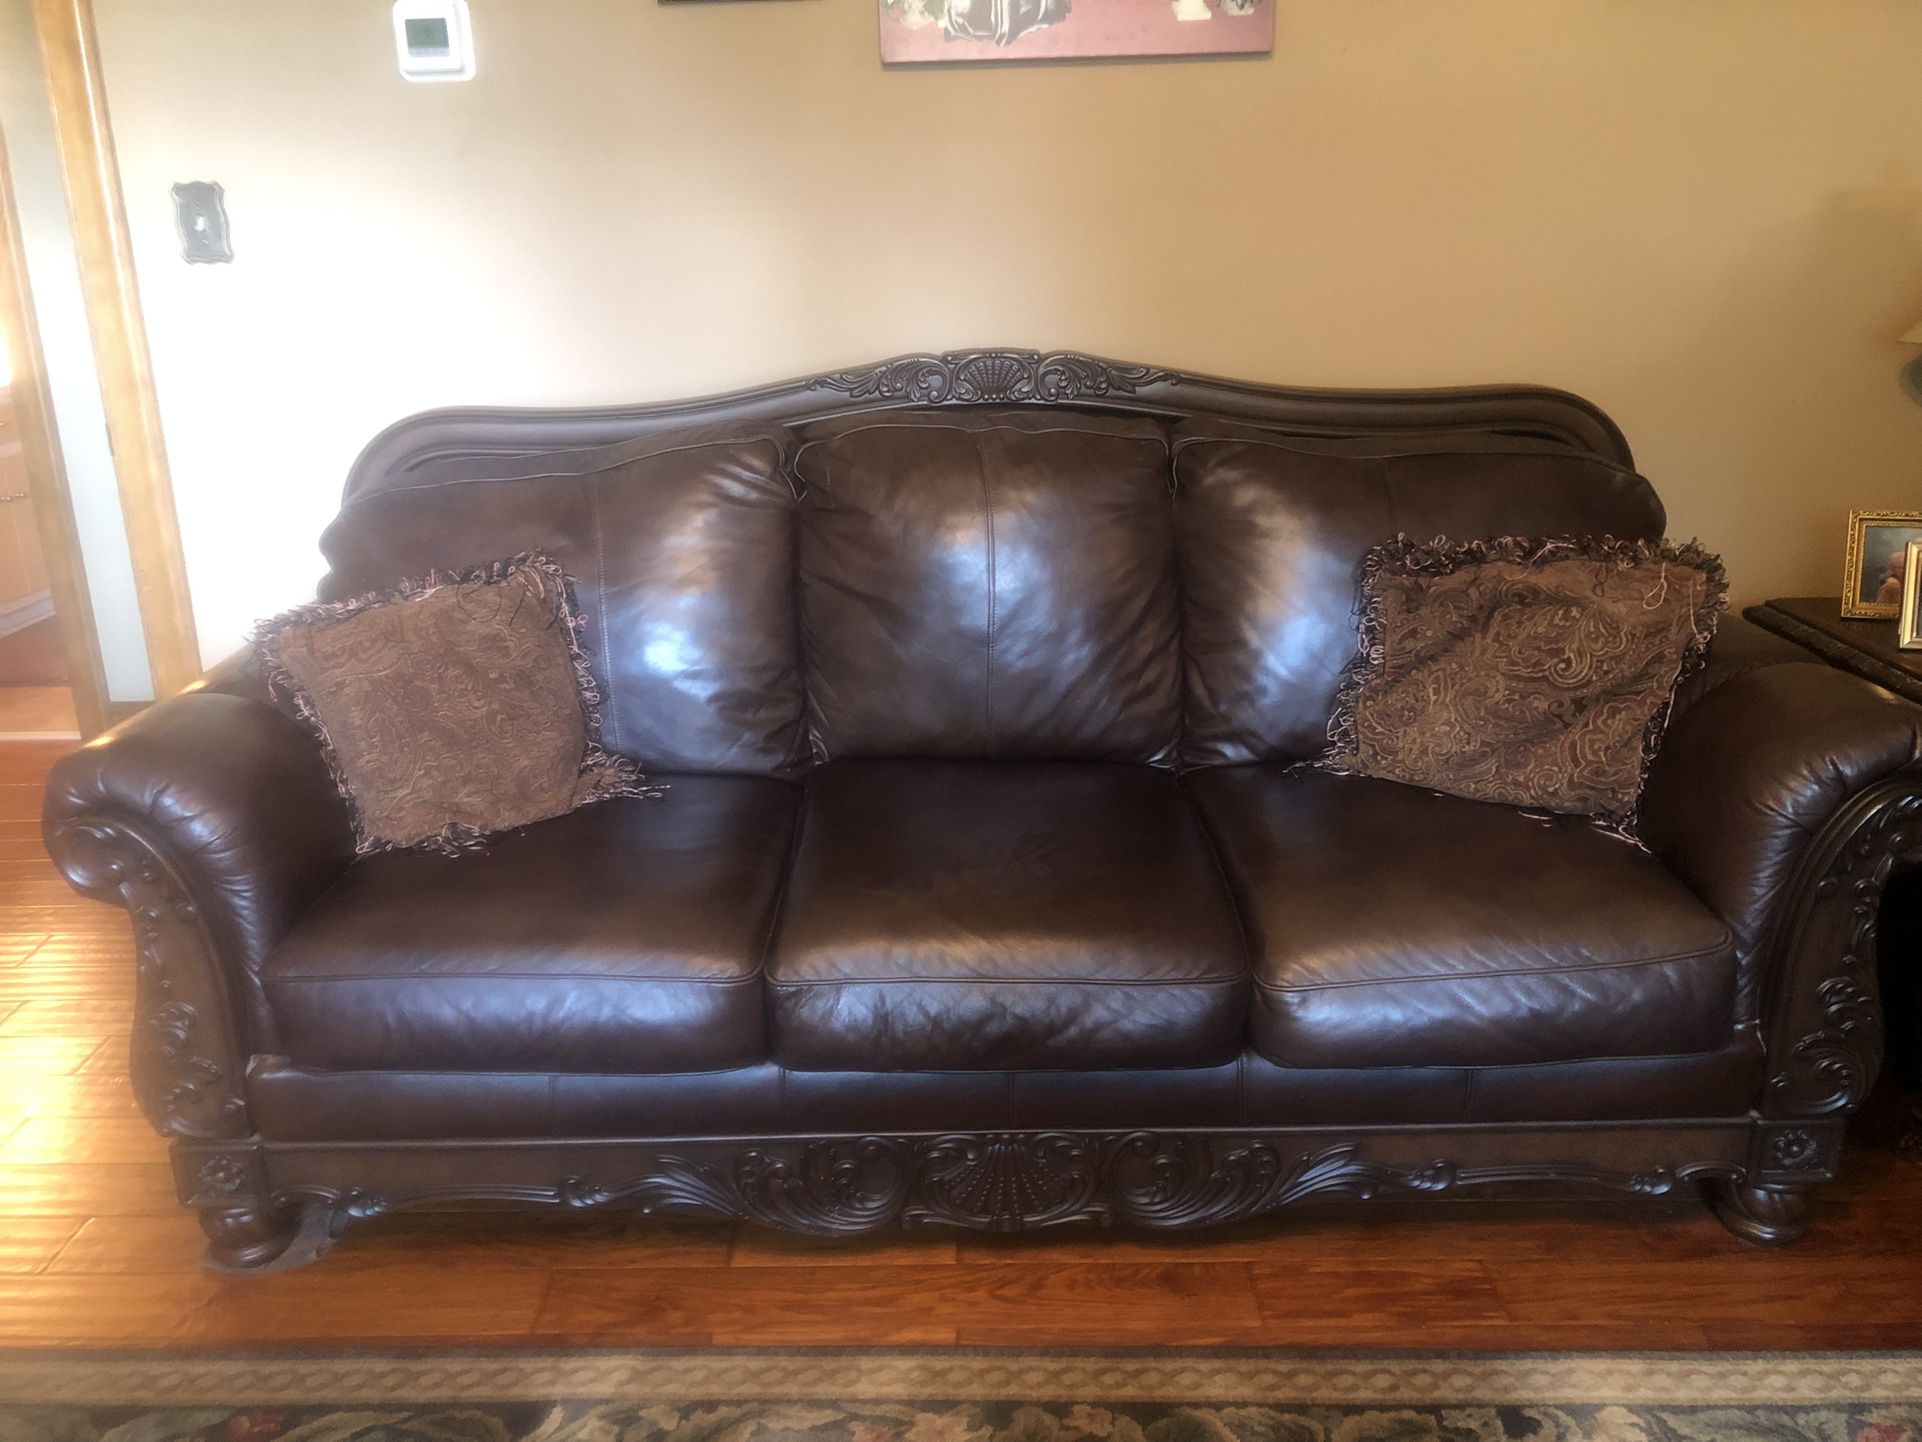 Dark brown leather Couches and two end tables